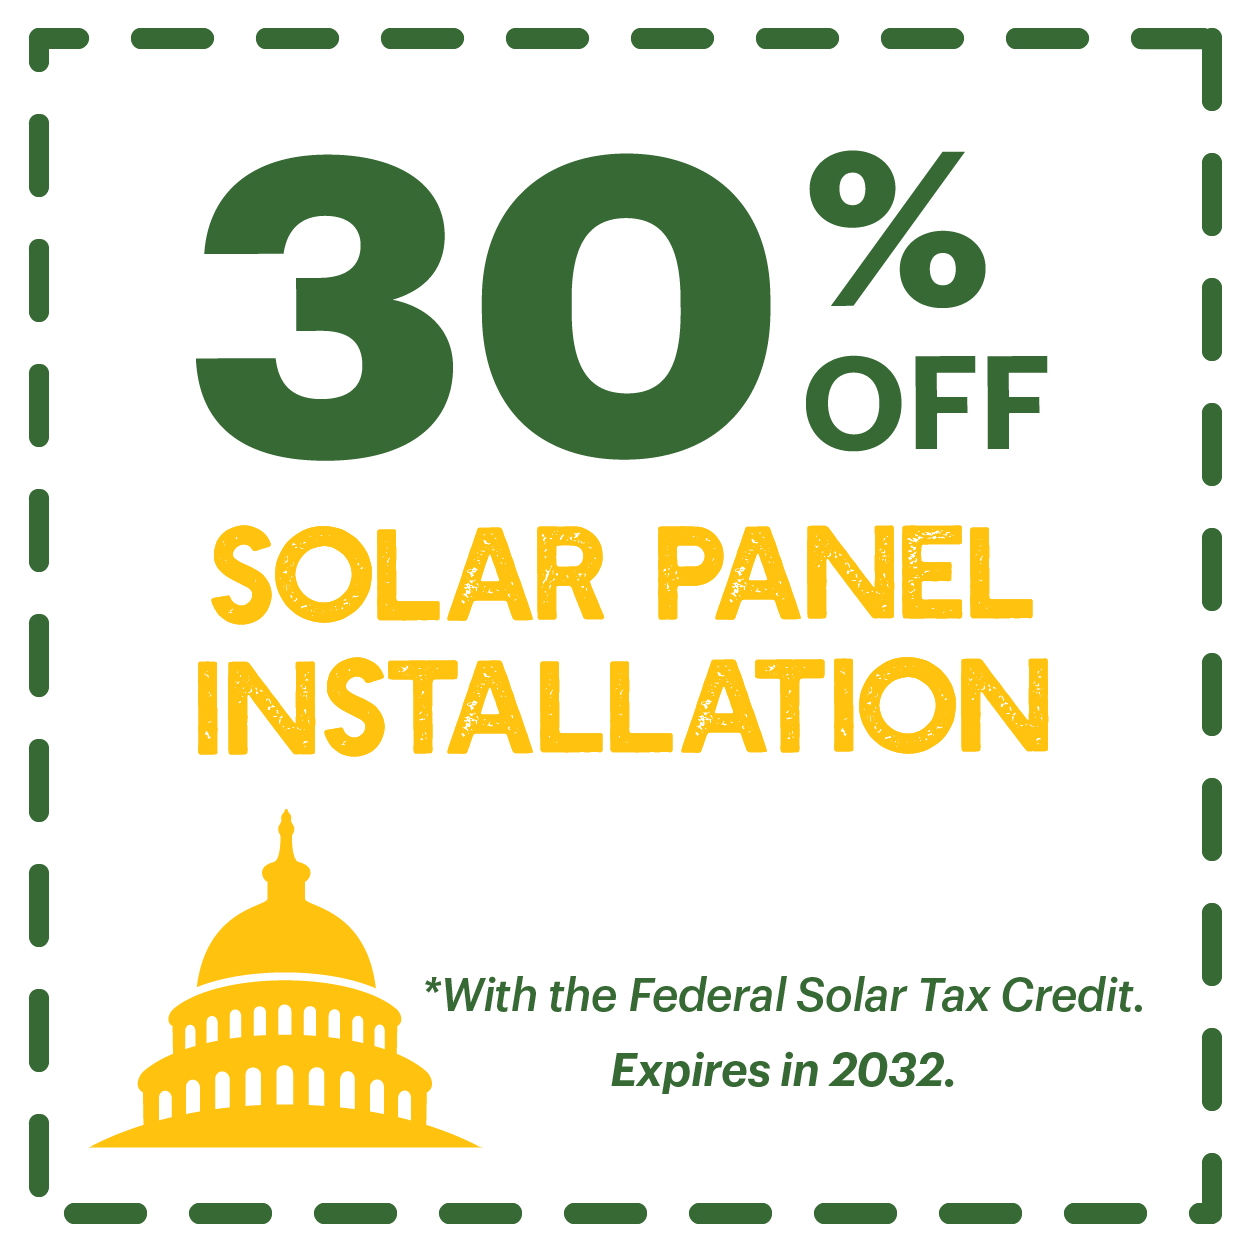 What Is The Federal Tax Credit For Solar Panels